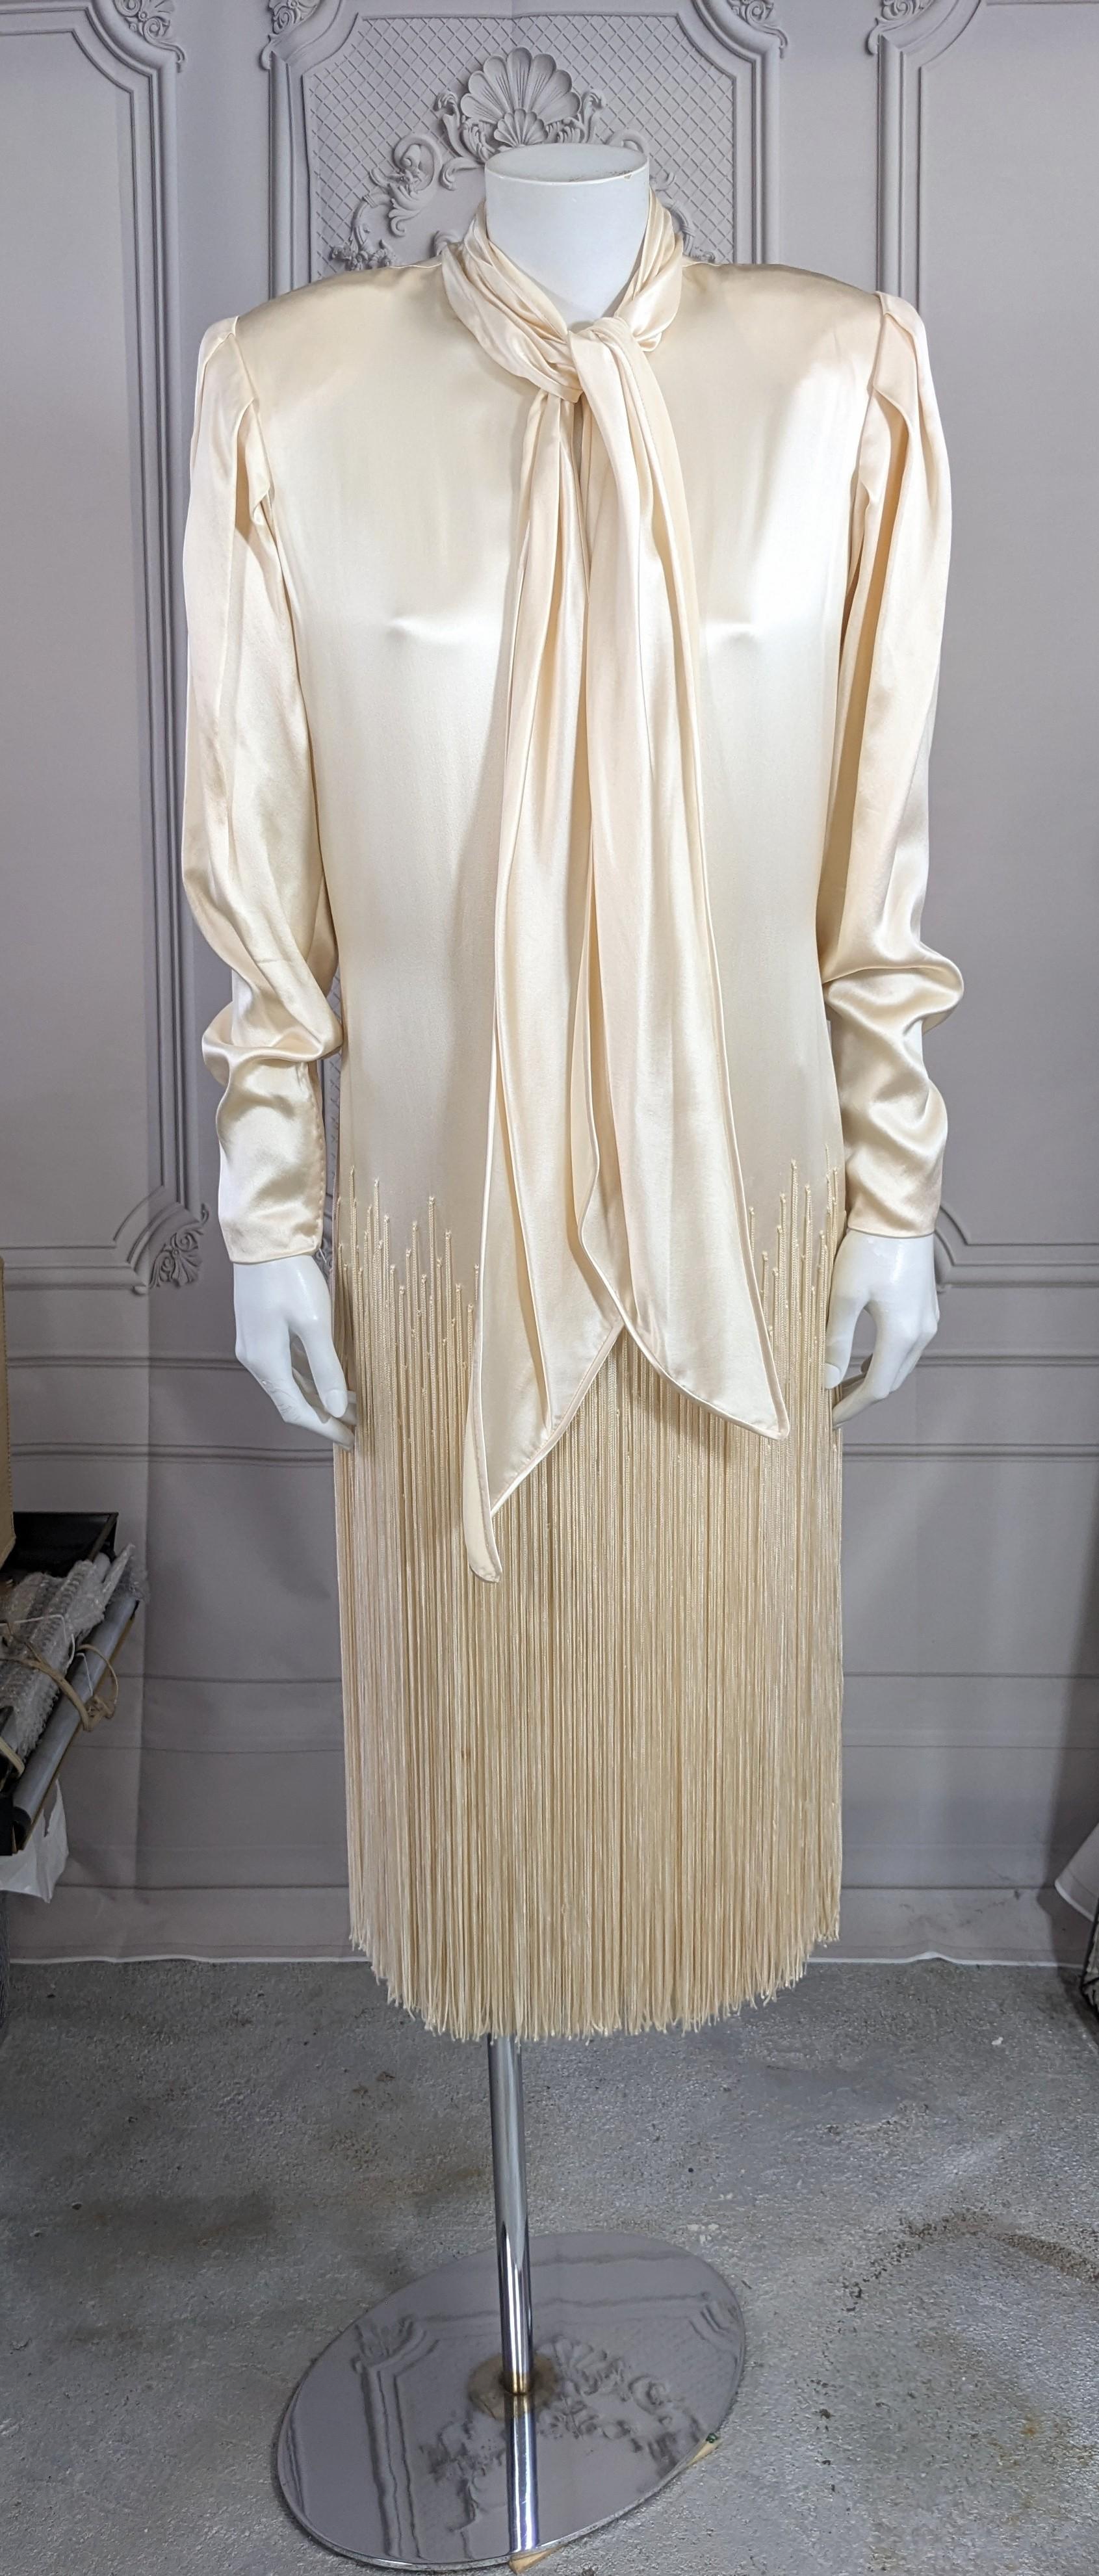 Galanos Silk Satin Hand Fringed Dress In Good Condition For Sale In New York, NY